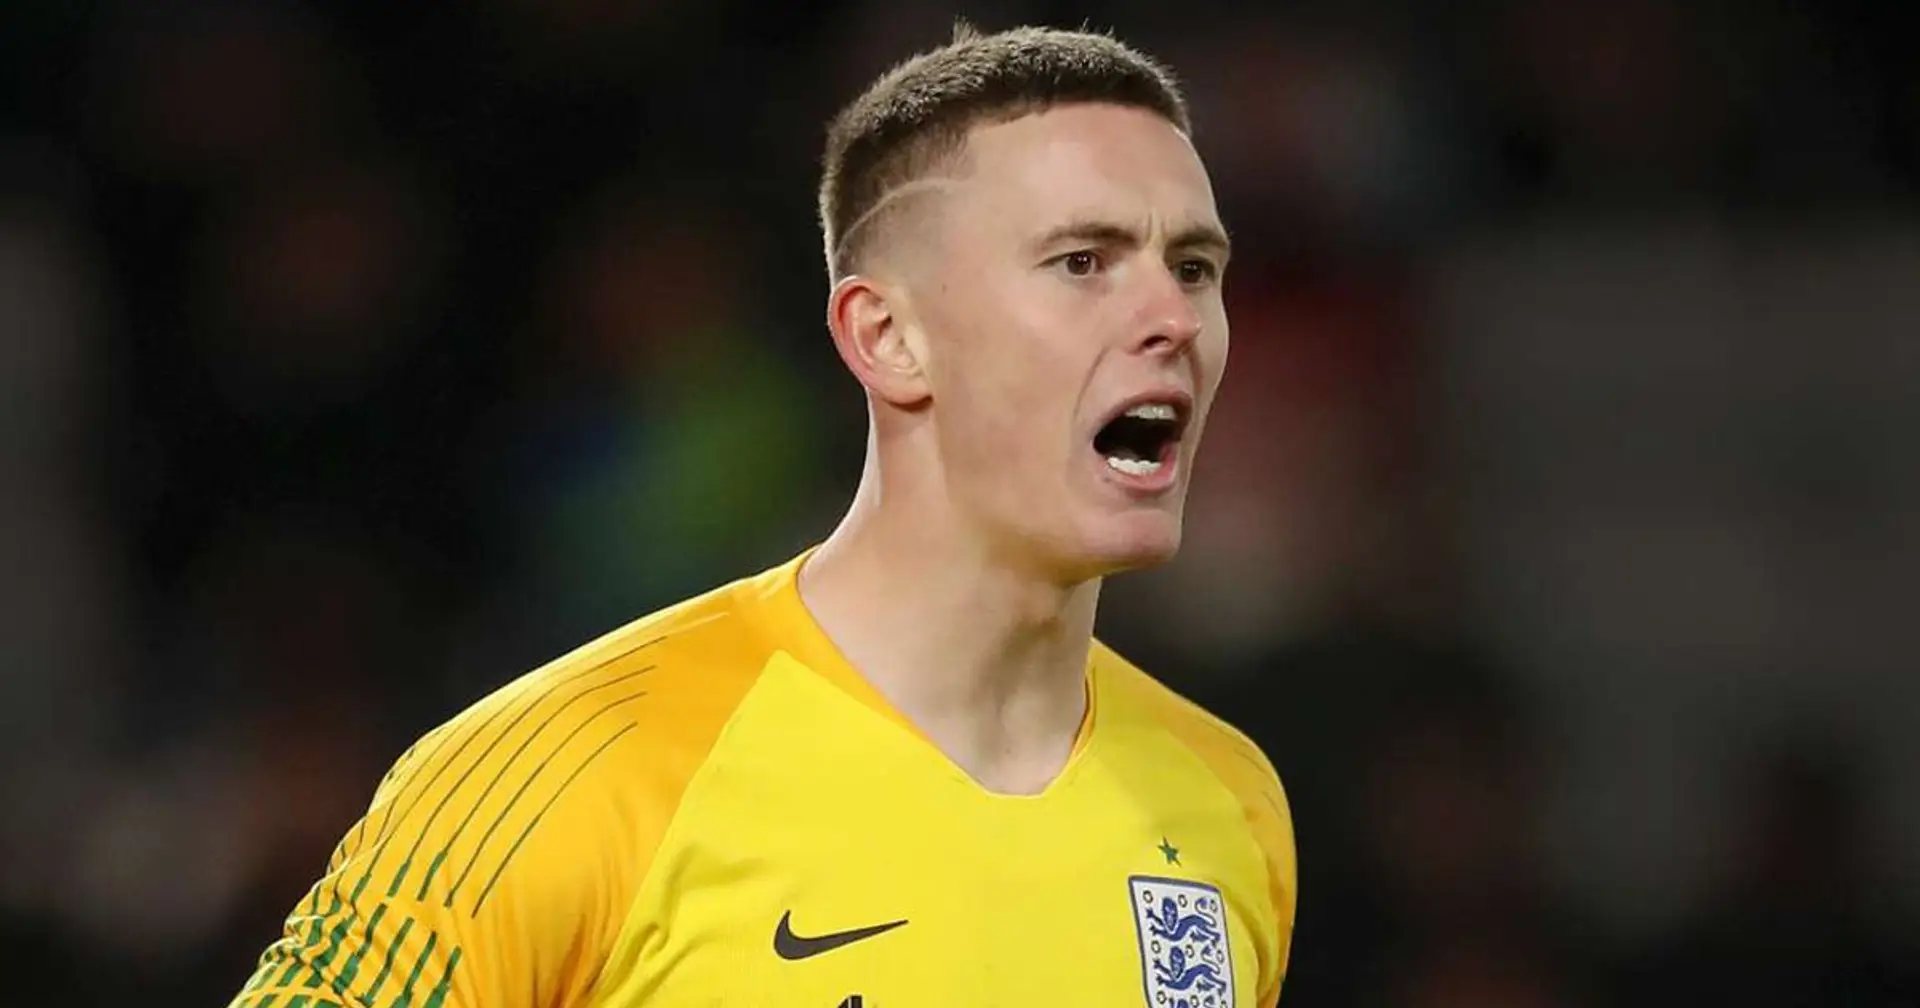 OFFICIAL: Henderson ruled out of Euro 2020 due to hip injury